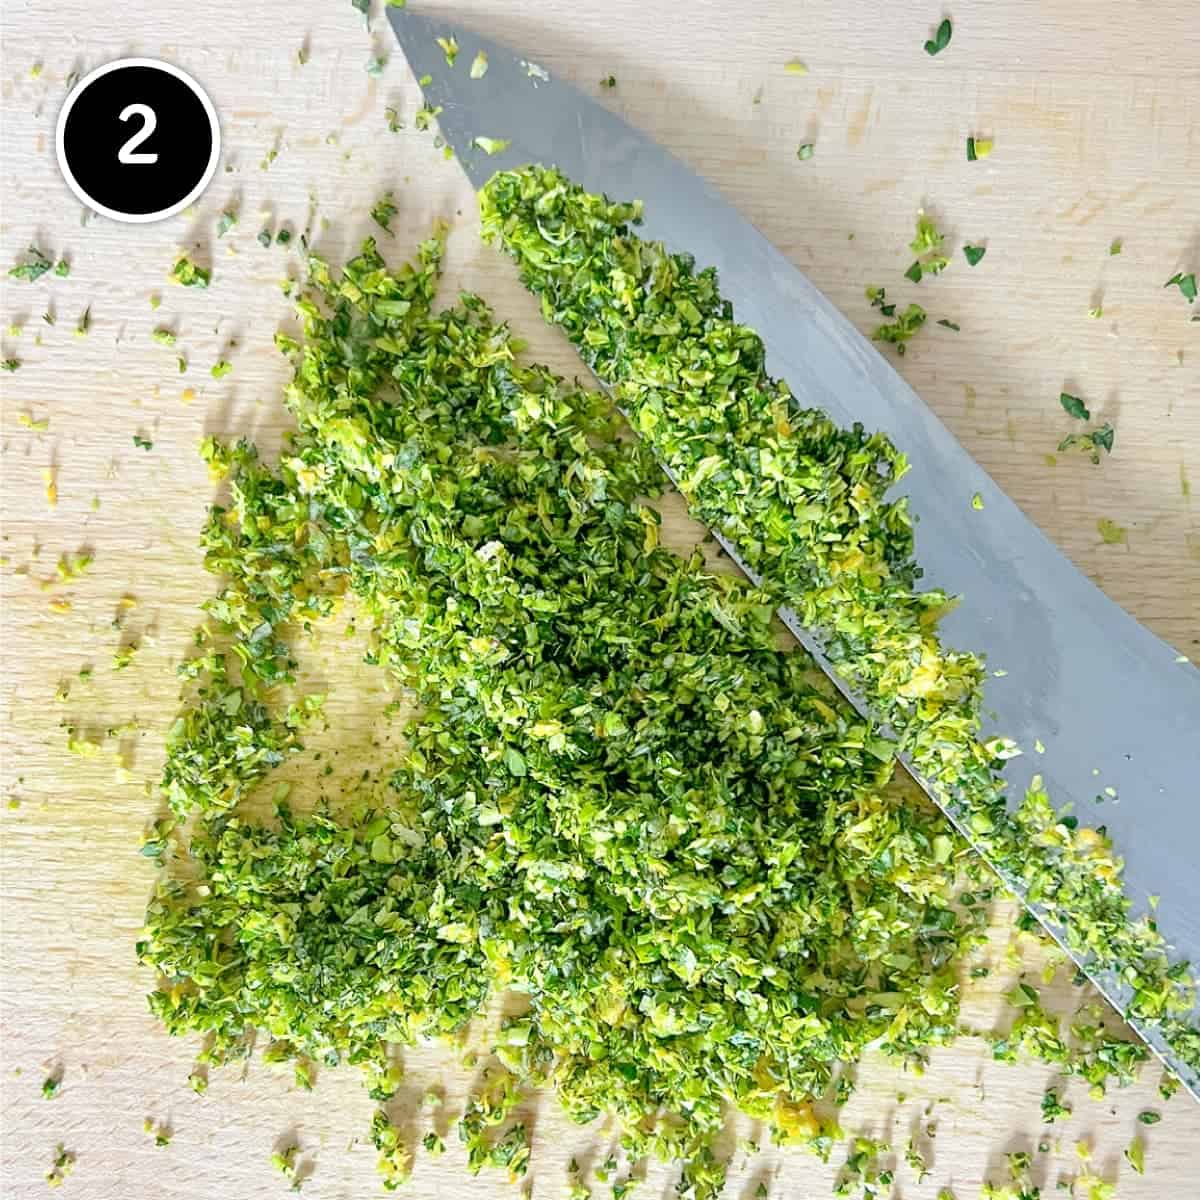 A kitchen knife sits alongside some finely chopped herbs.